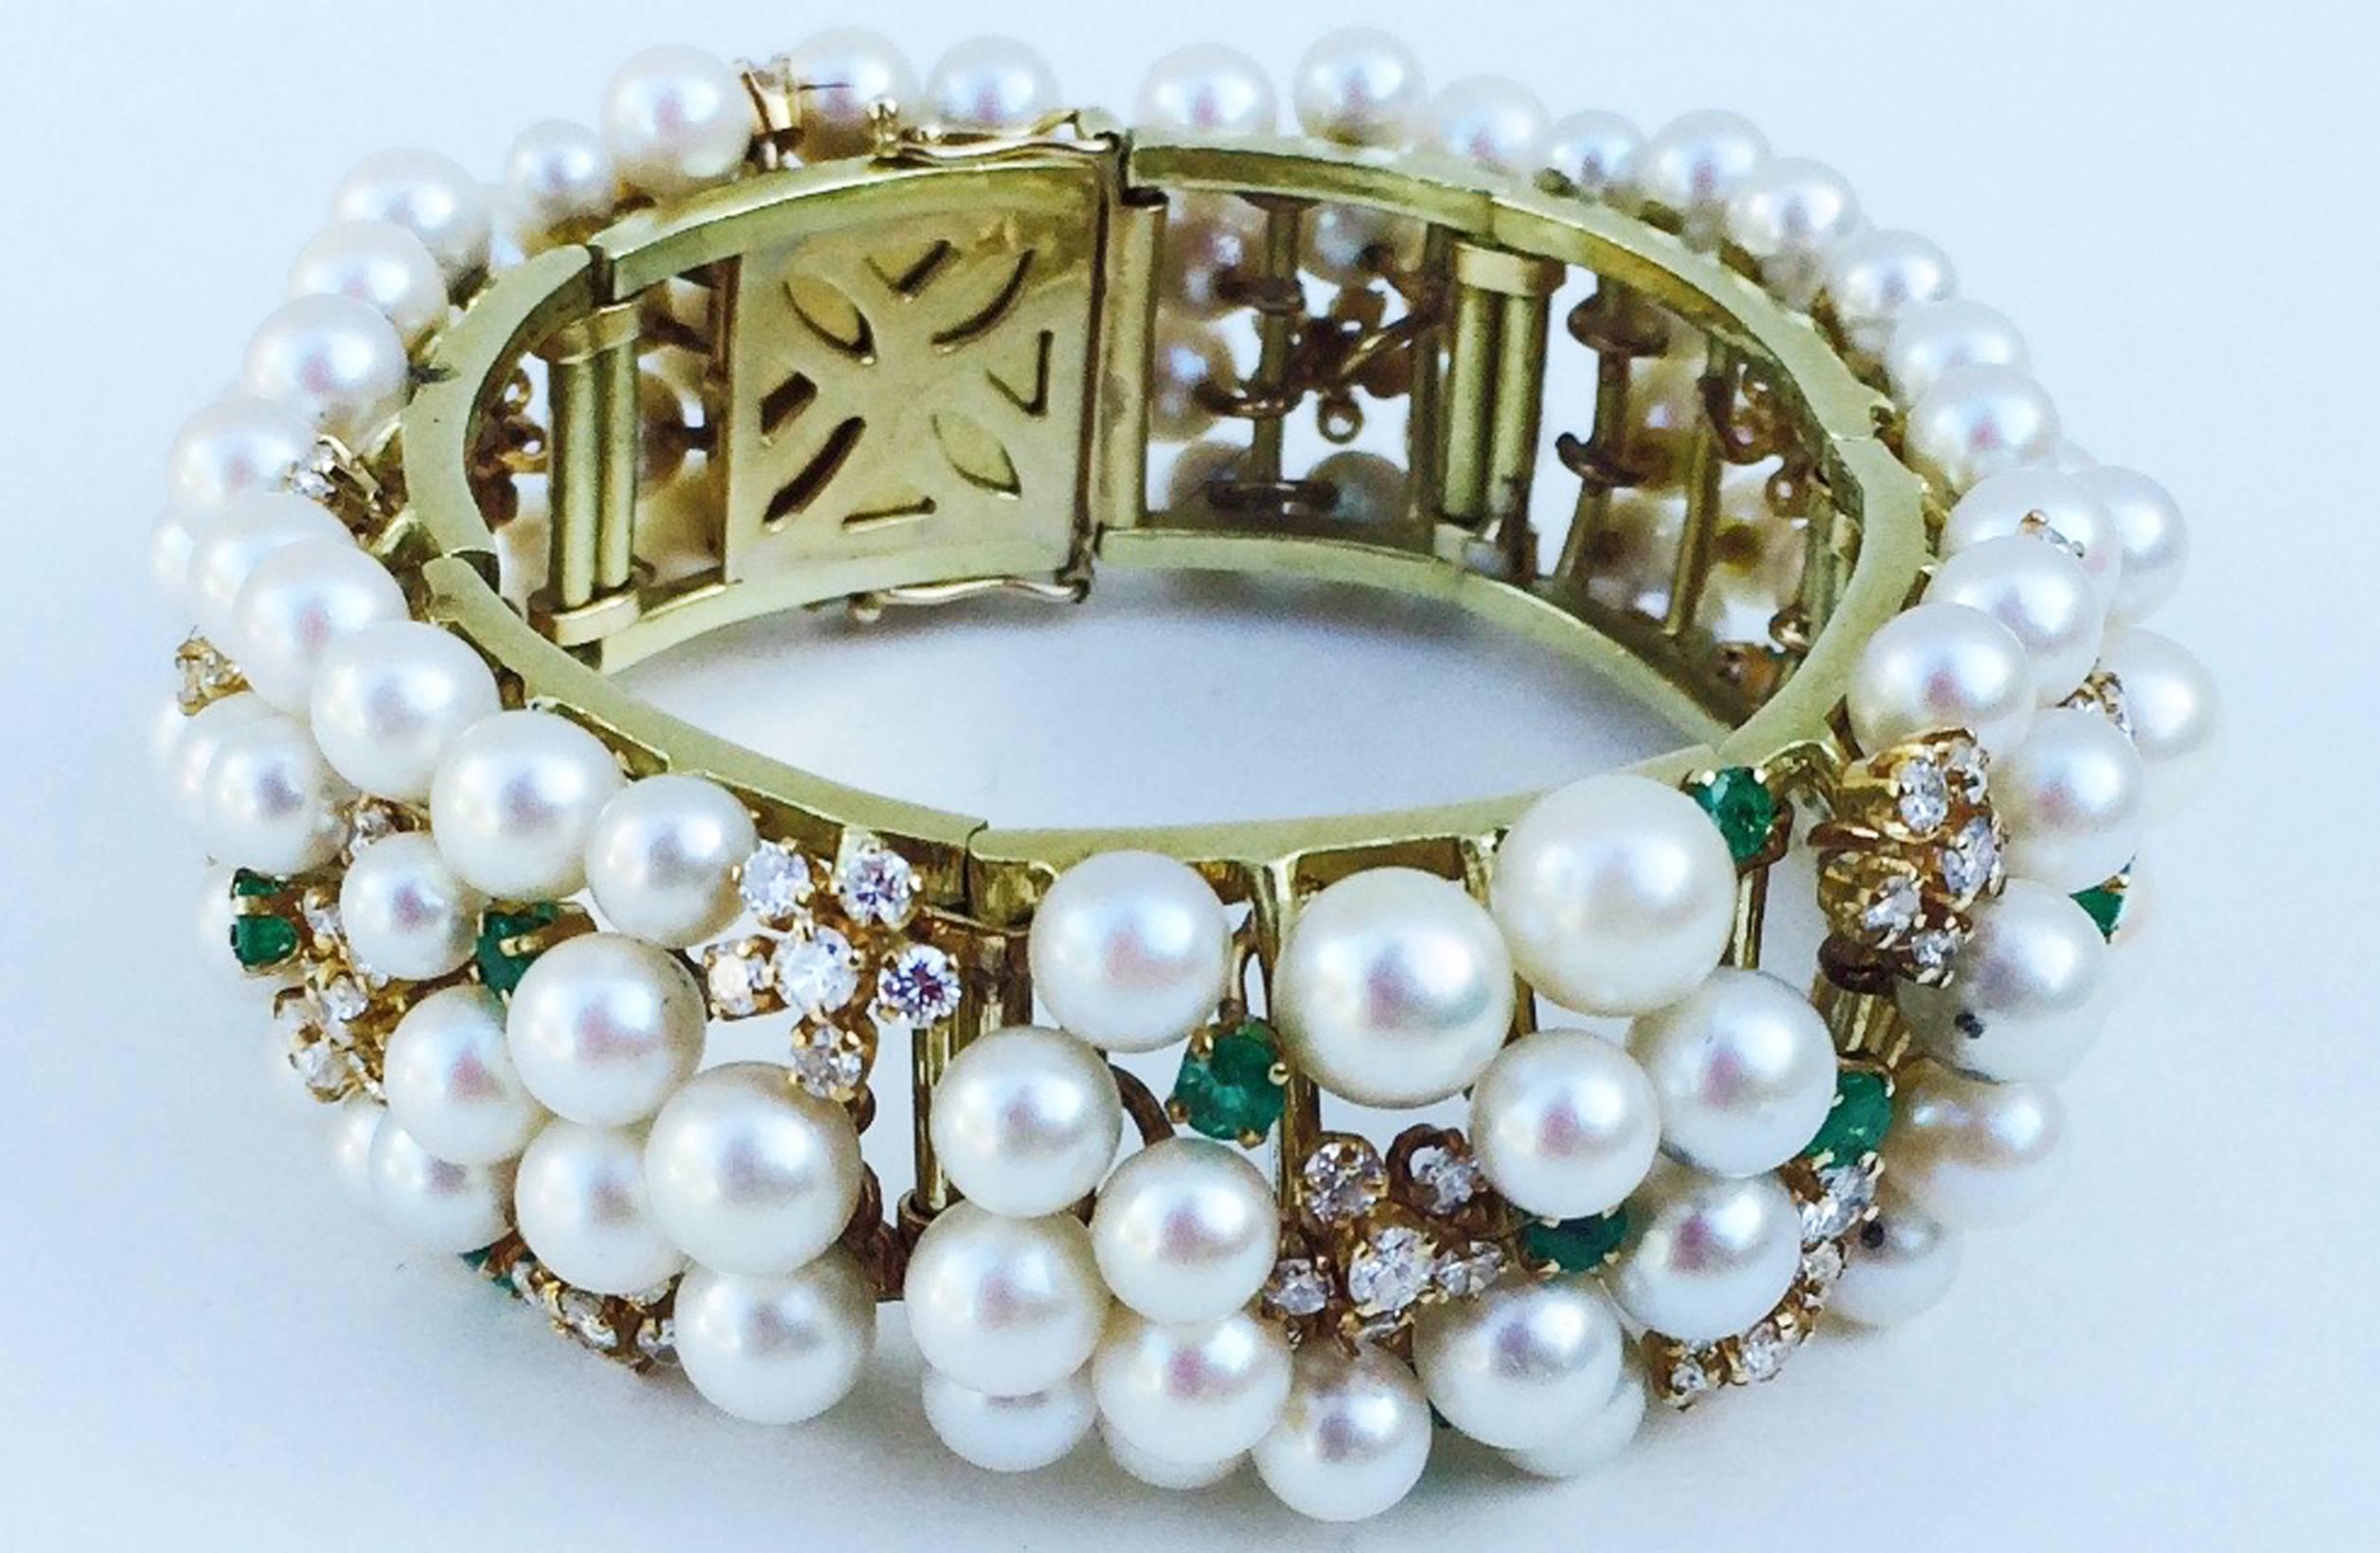 A exquisite mid-century pearl encrusted cuff bracelet. Hinged yellow gold item completely covered with pearls (3mm to 6mm), sparkling diamonds (approx. 5.71ctw) and emeralds (approx. 1.5ctw). Original hidden push button clasp and side locks intact.